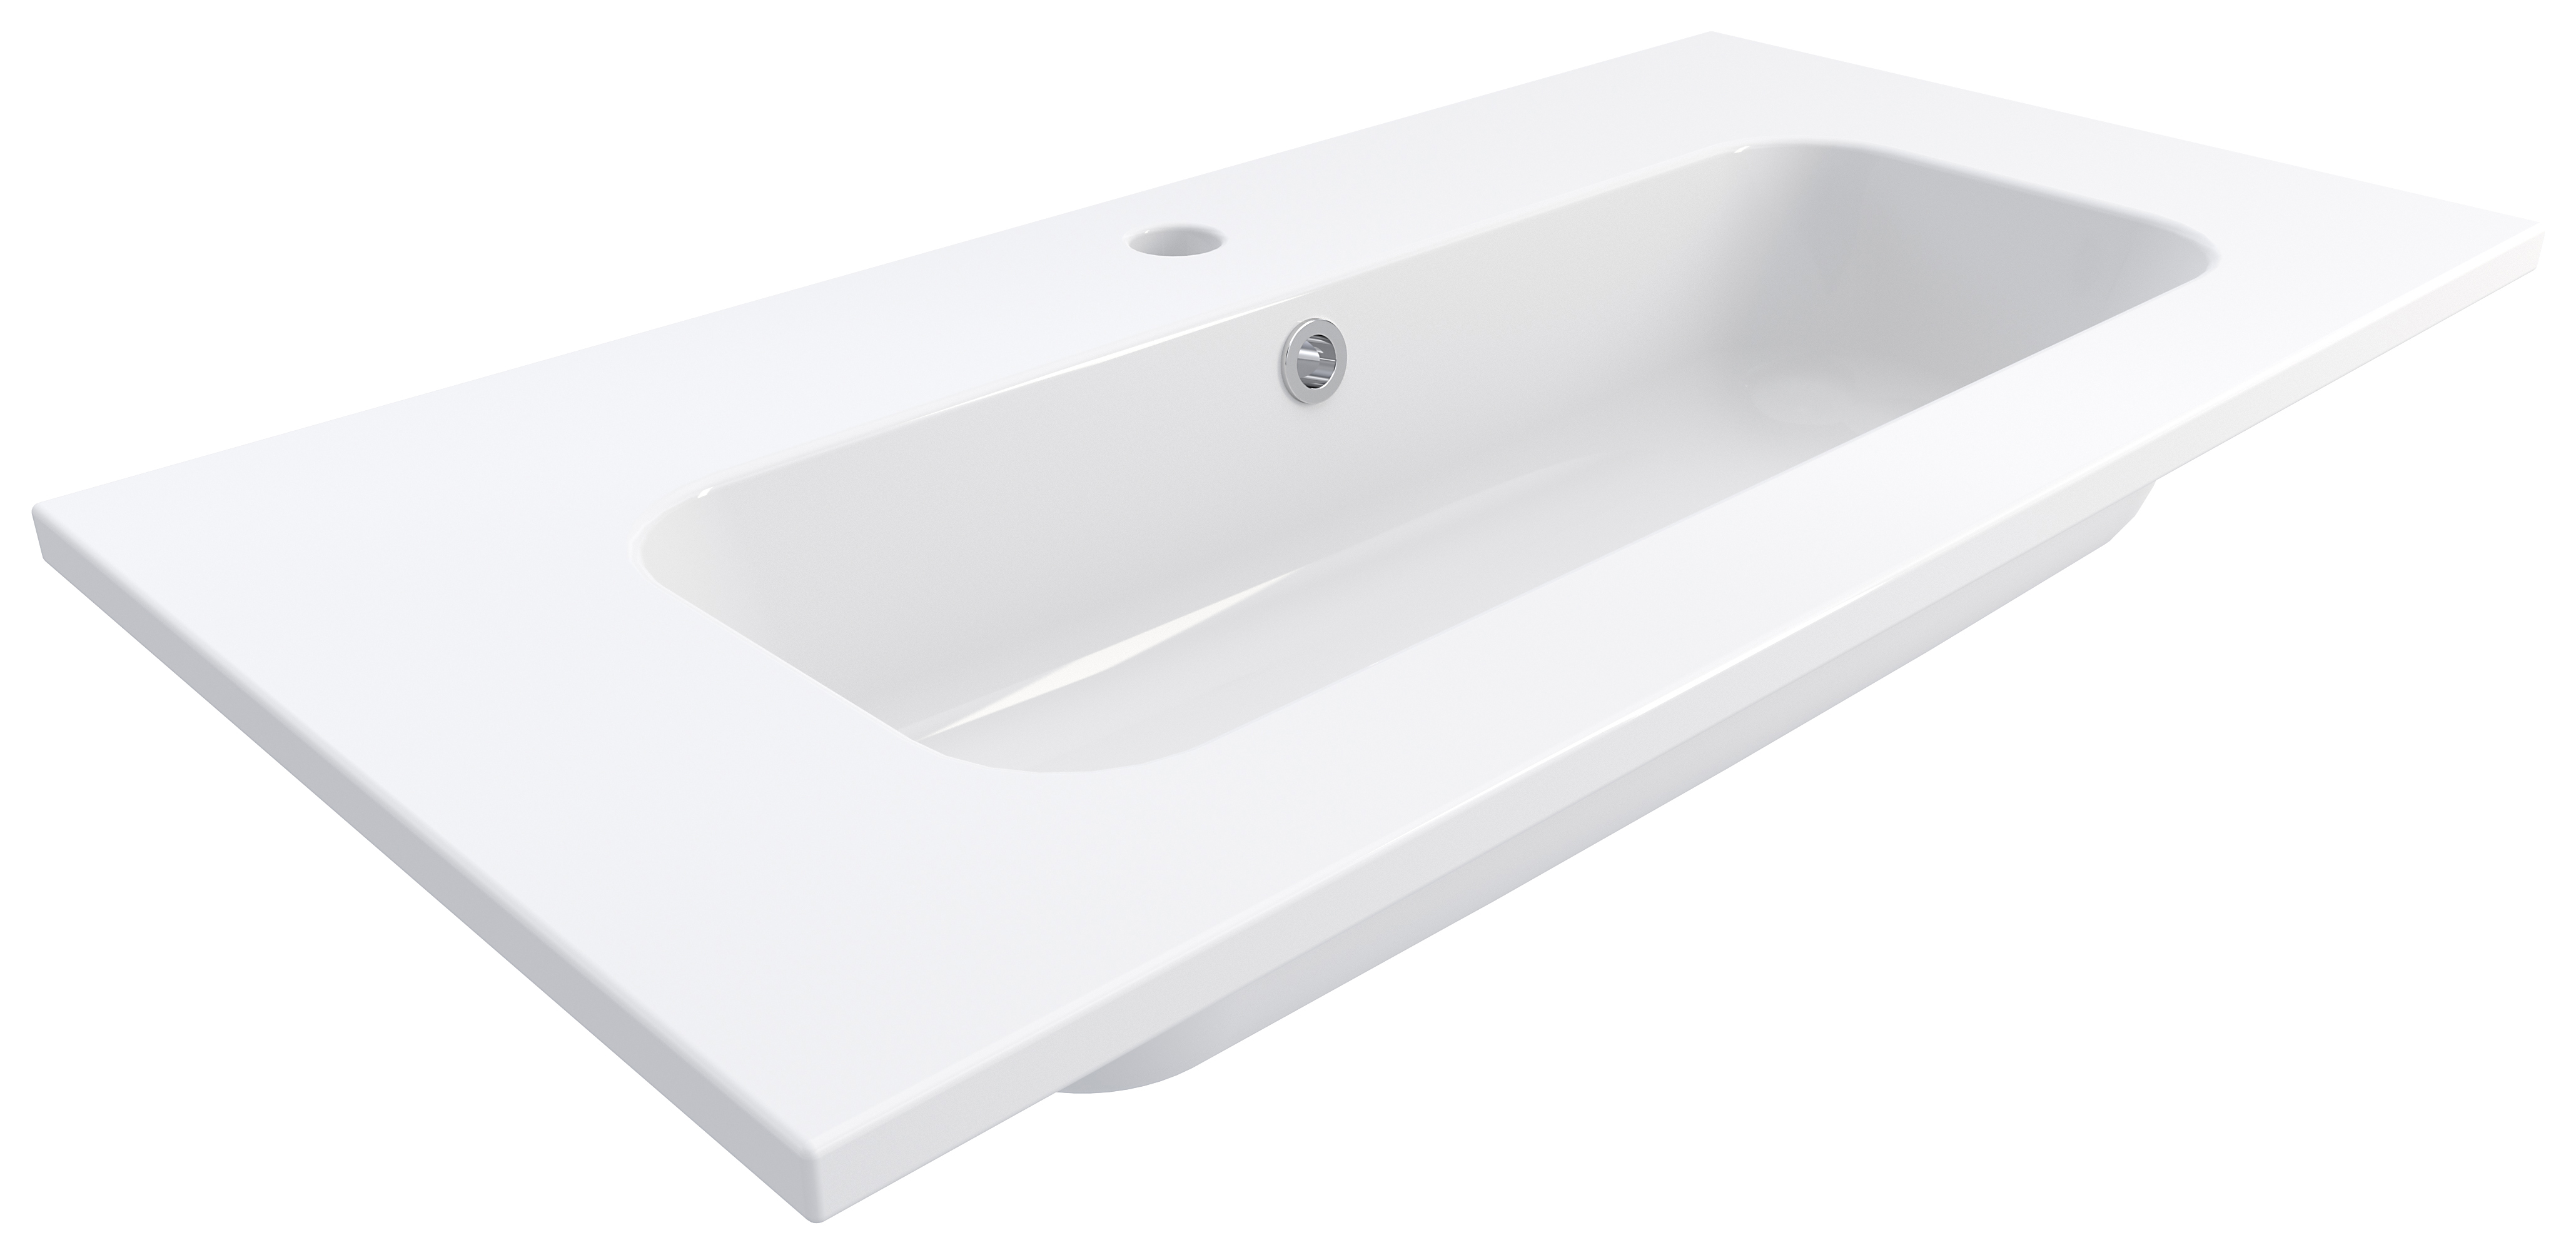 Image of Duarti By Calypso Twyford Cast Marble Vanity Basin - 810 x 405mm